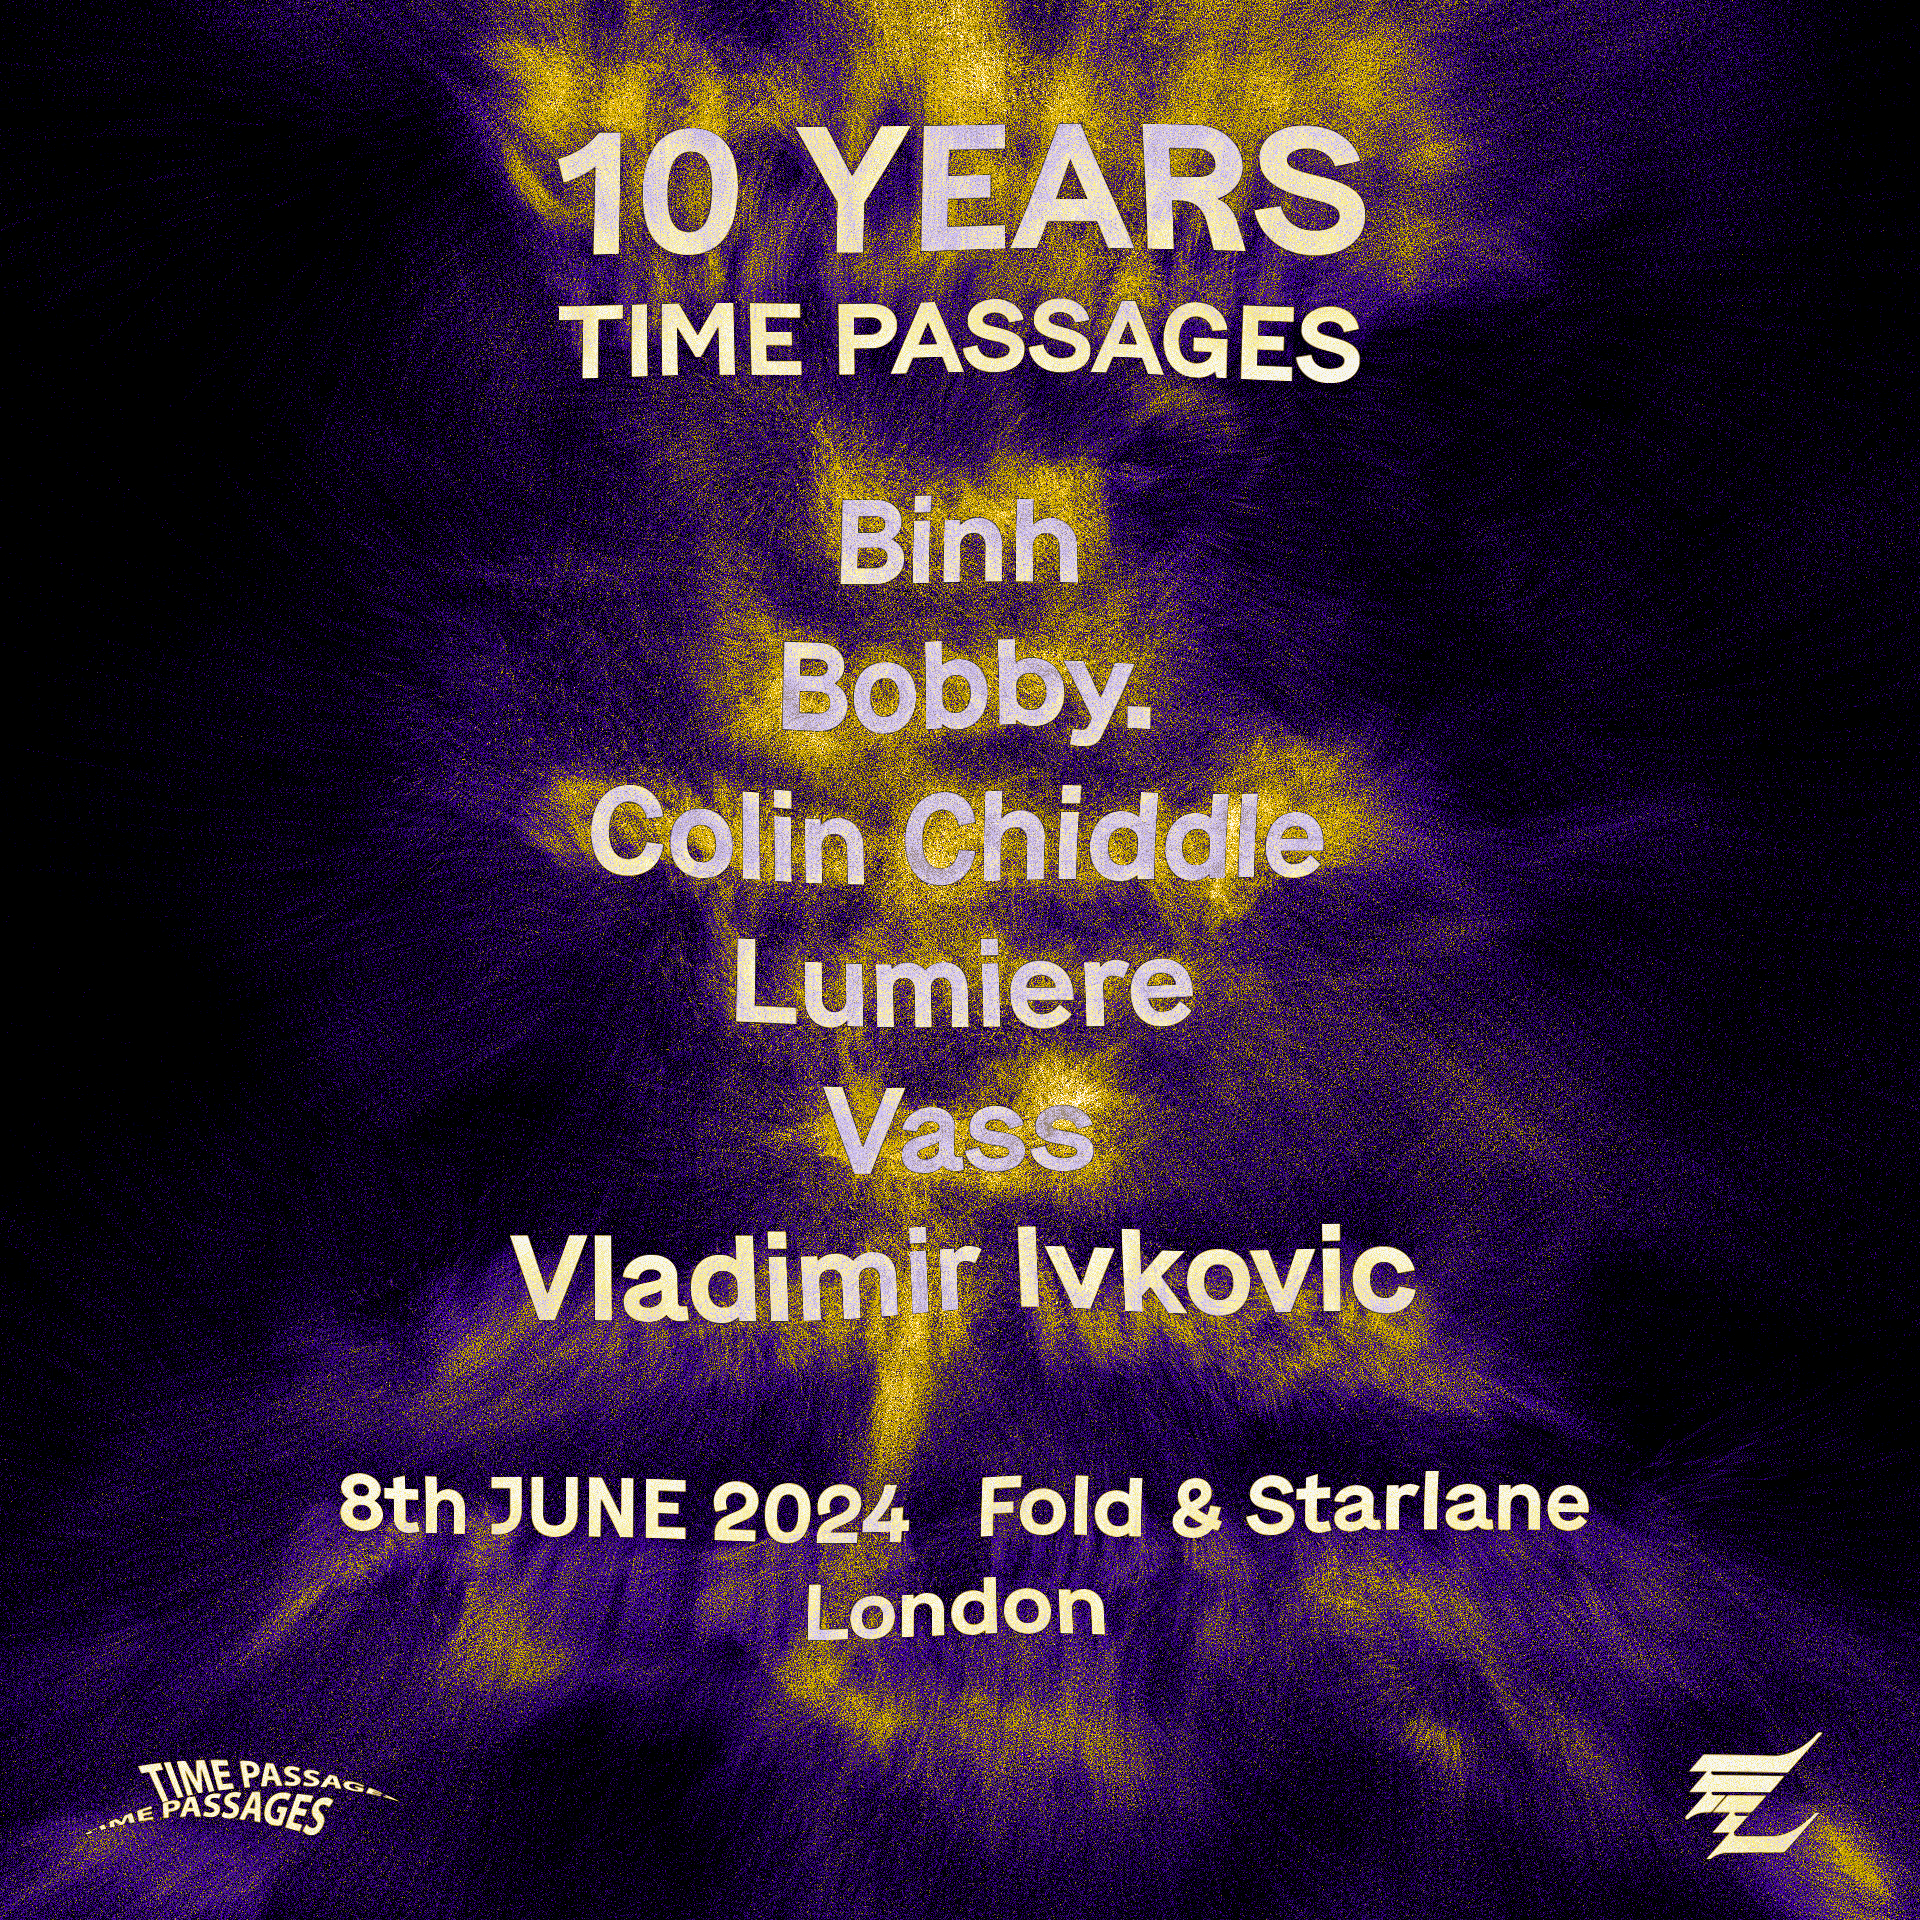 10 YEARS OF TIME PASSAGES - Página trasera